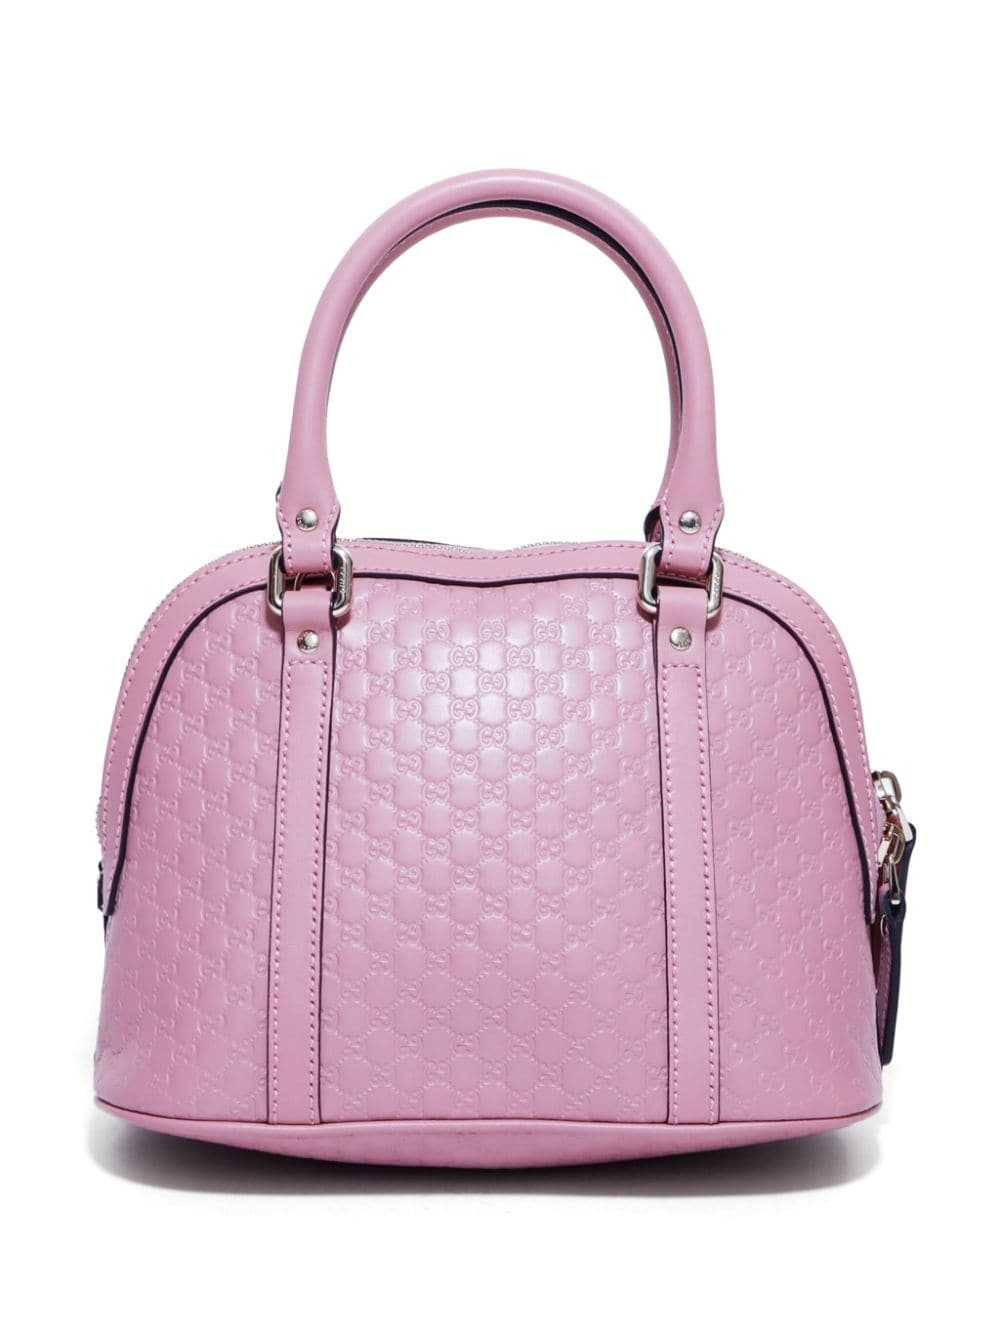 Gucci Pre-Owned Microguccissima two-way bag - Pink - image 2